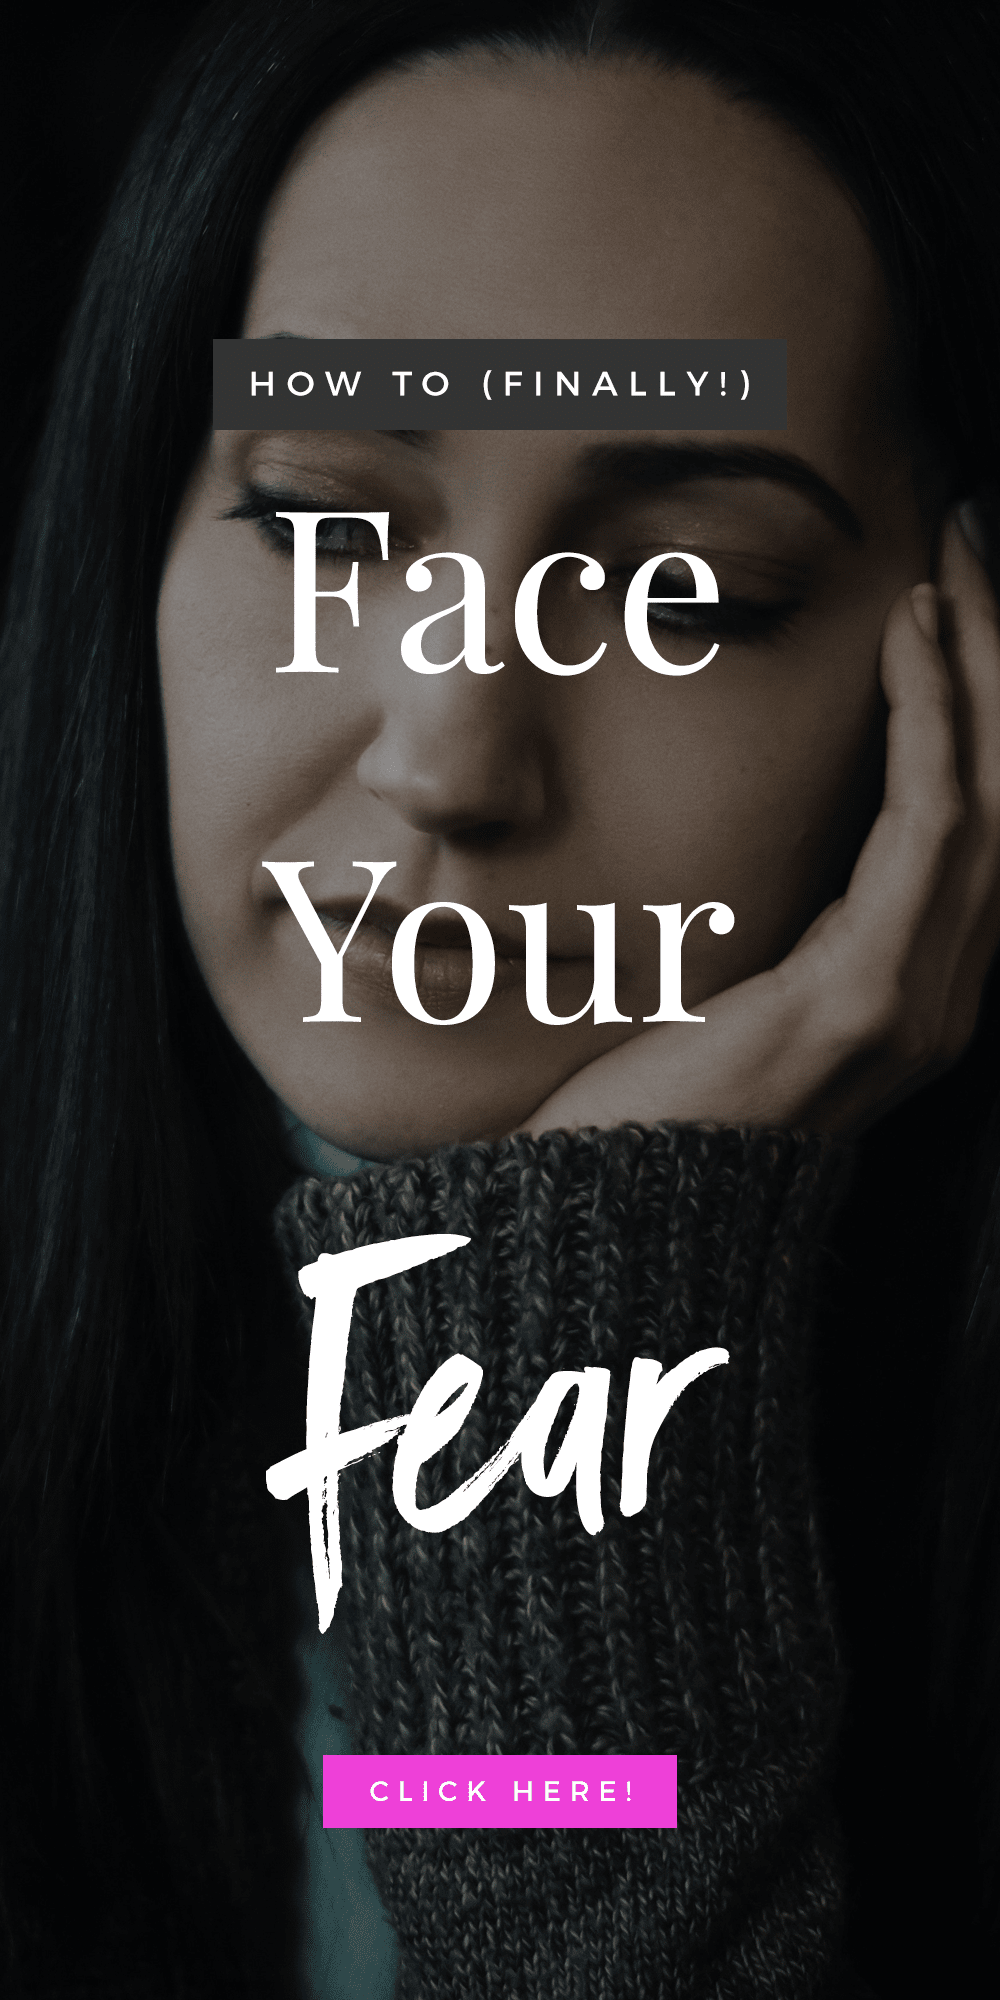 How To (Finally!) Face Your Fear